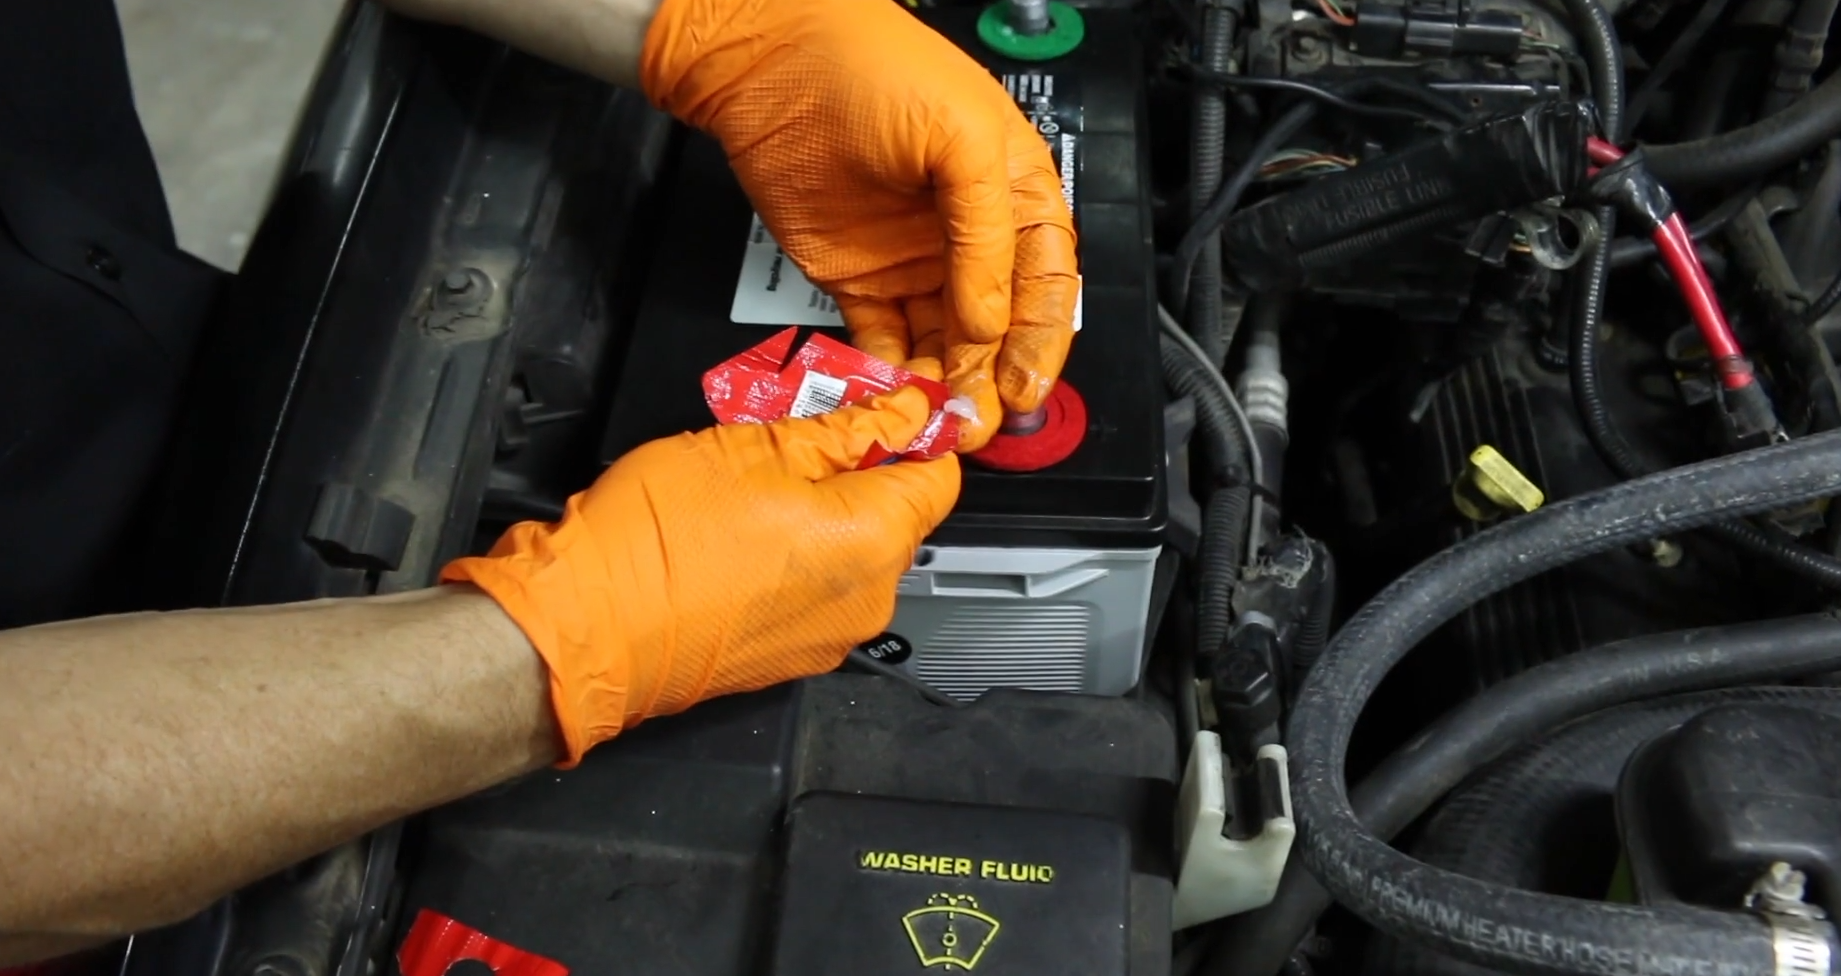 How to Disconnect and Replace a Car Battery - Step-by-Step Guide